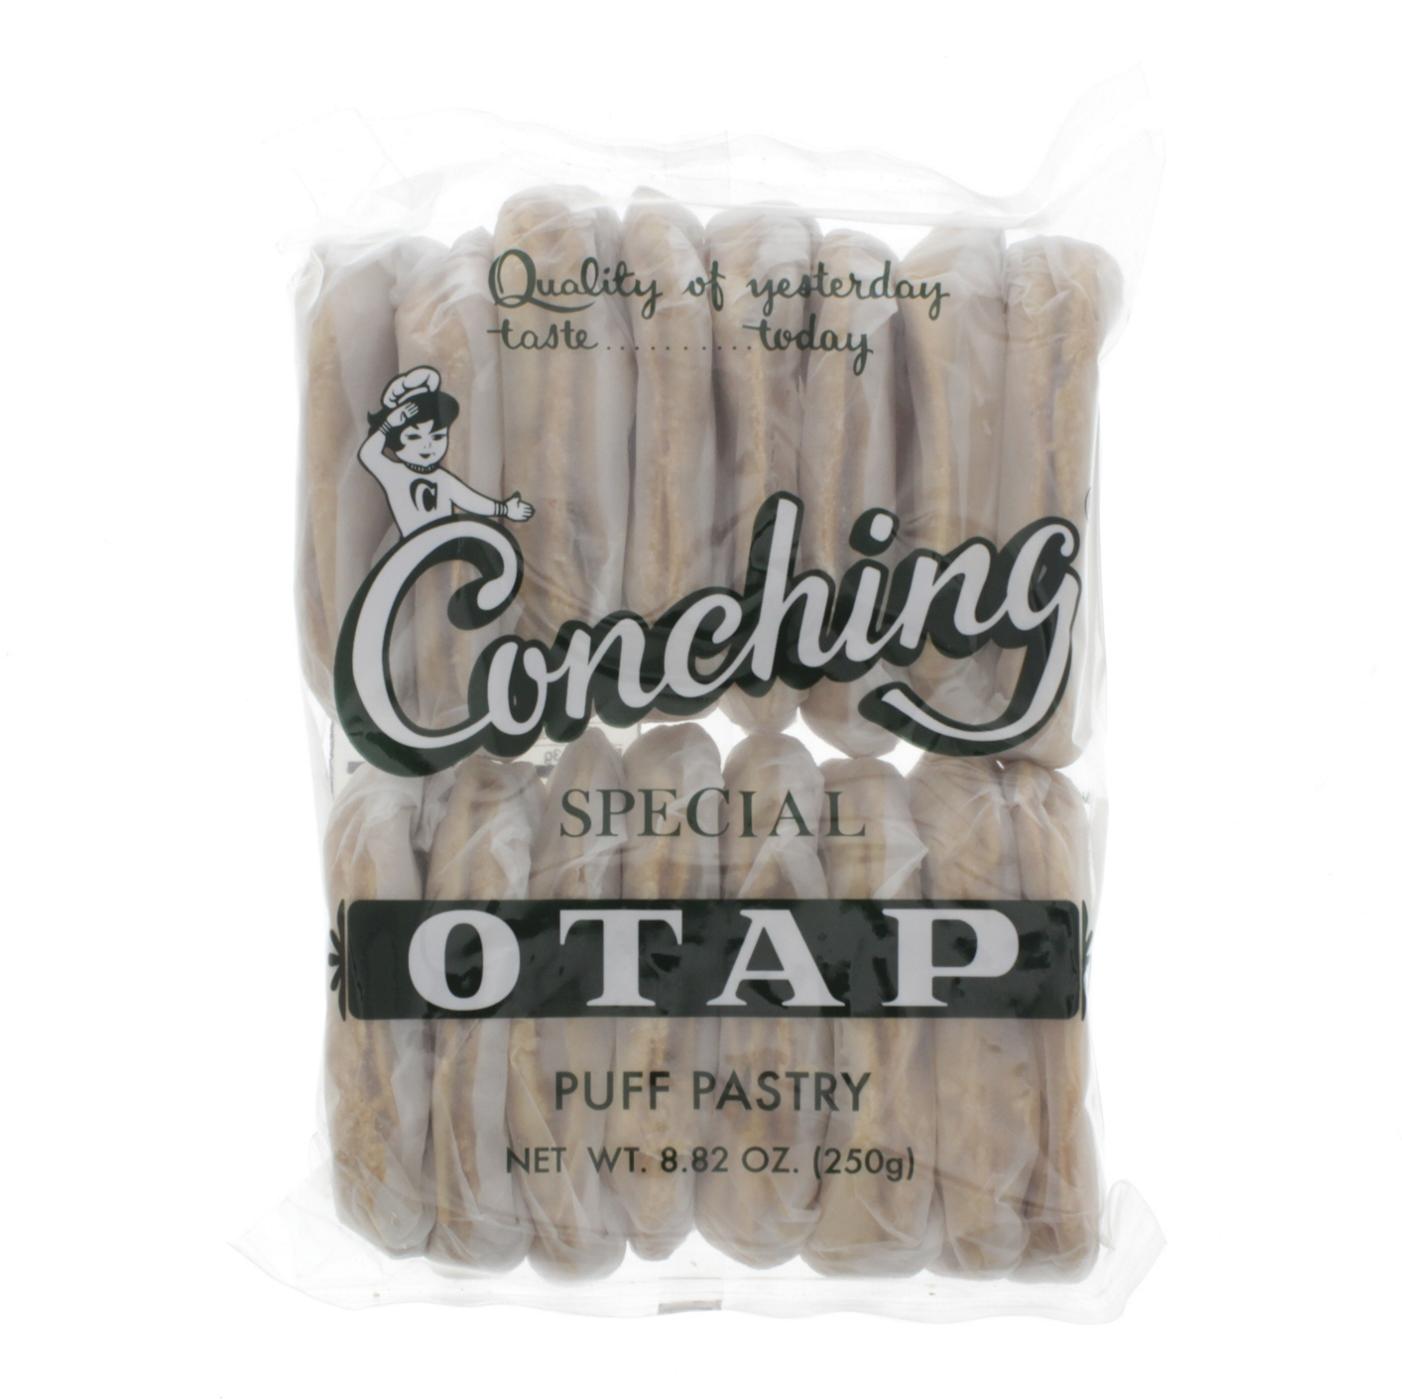 Conching Special Otap Puff Pastry; image 1 of 2